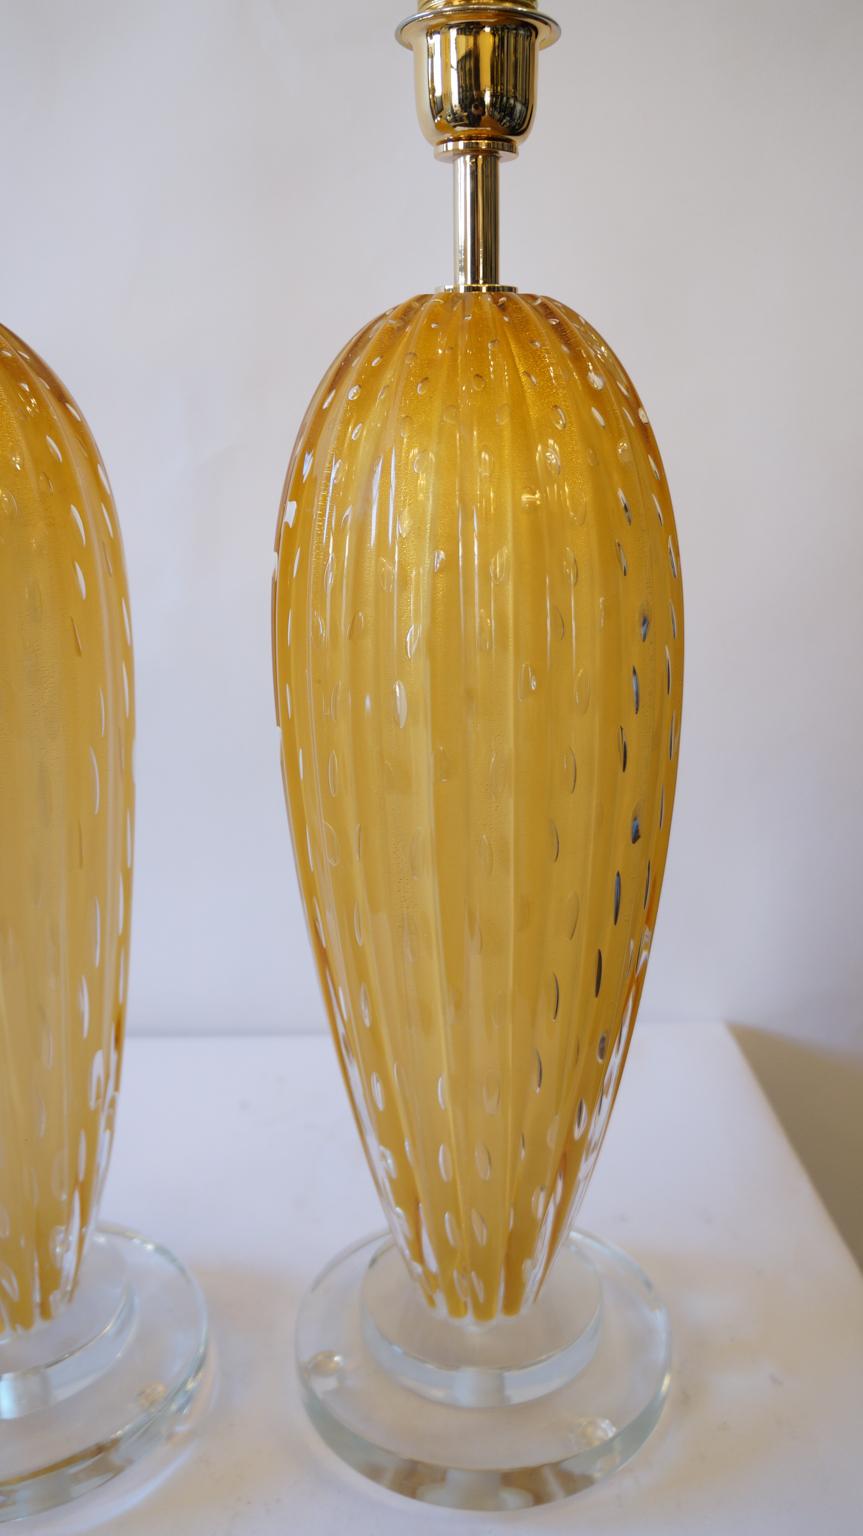 Toso Murano Mid-Century Modern Amber Two Murano Glass Table Lamps Italian, 1995 For Sale 1